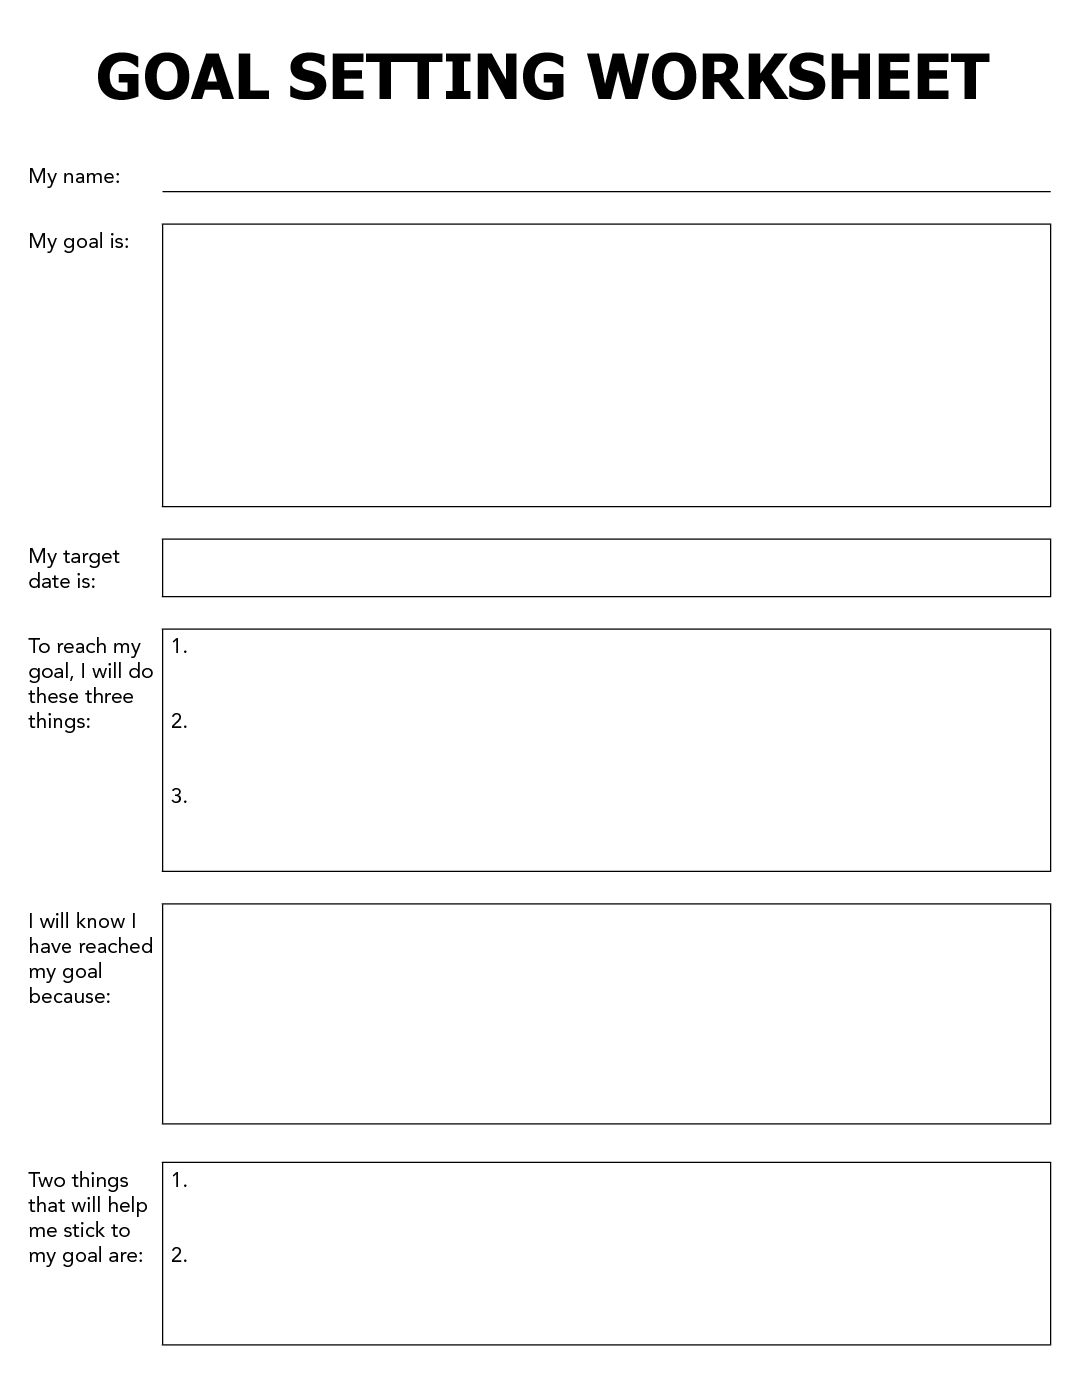 Business Goal Setting Worksheet | Adhd | Goals Worksheet, Goal - Free Printable Goal Setting Worksheets For Students